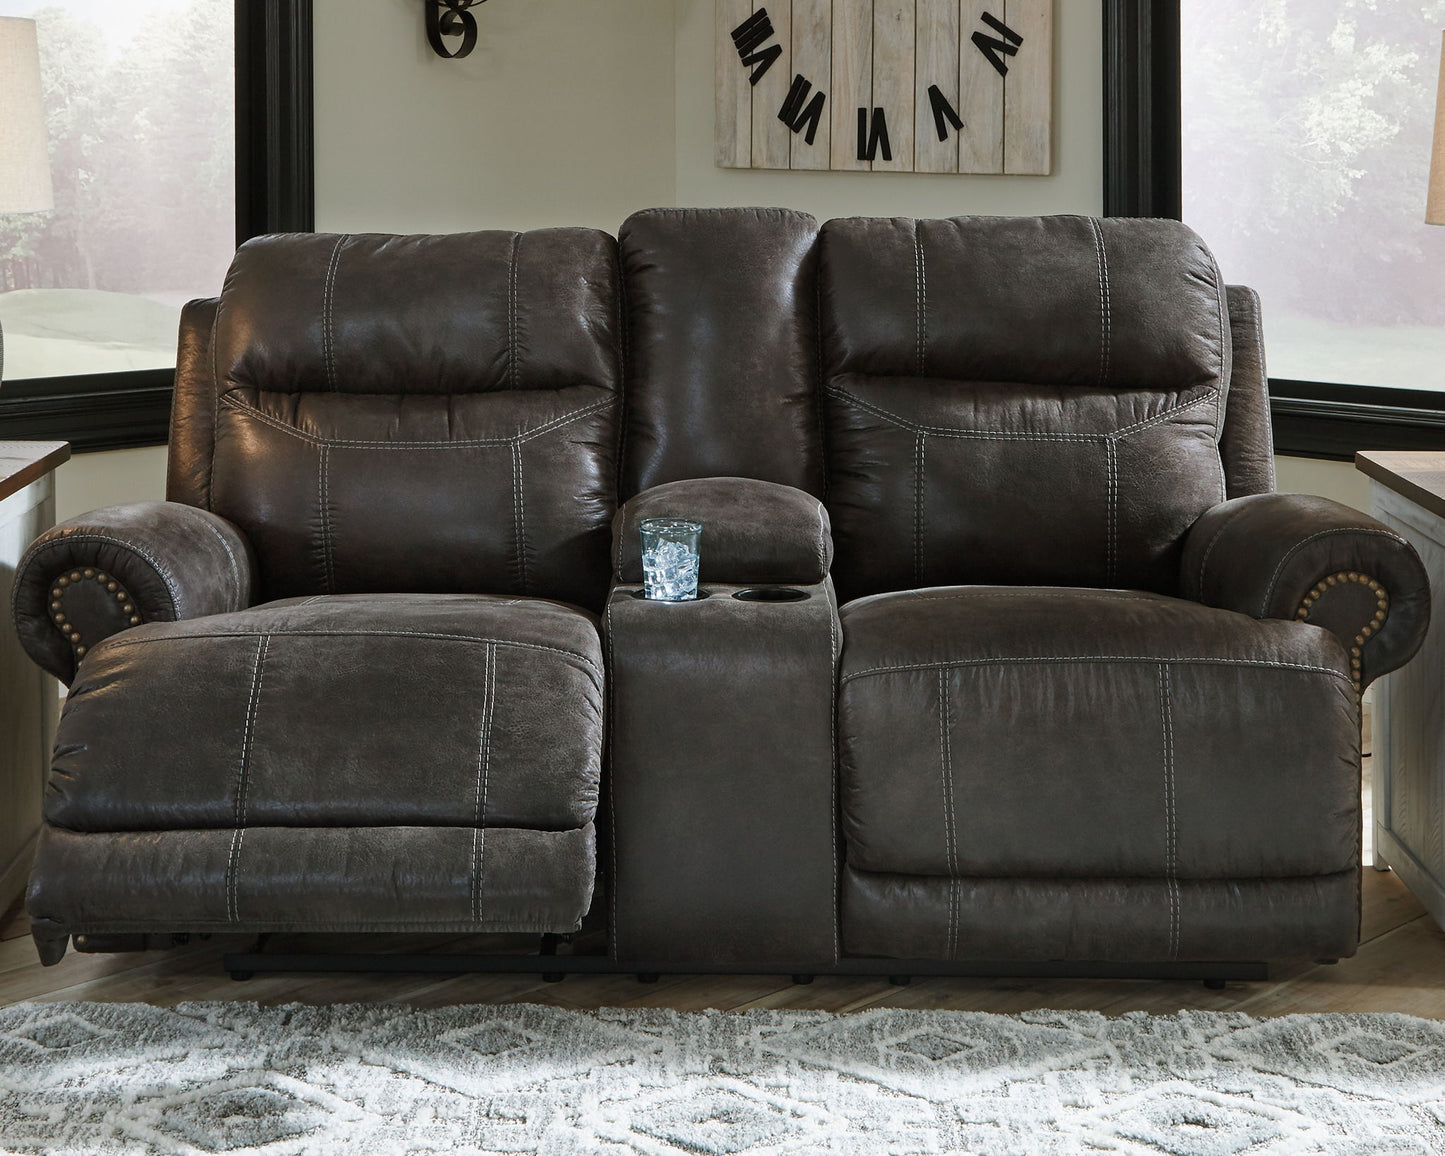 Grearview - Charcoal - Pwr Rec Loveseat/Con/Adj Hdrst